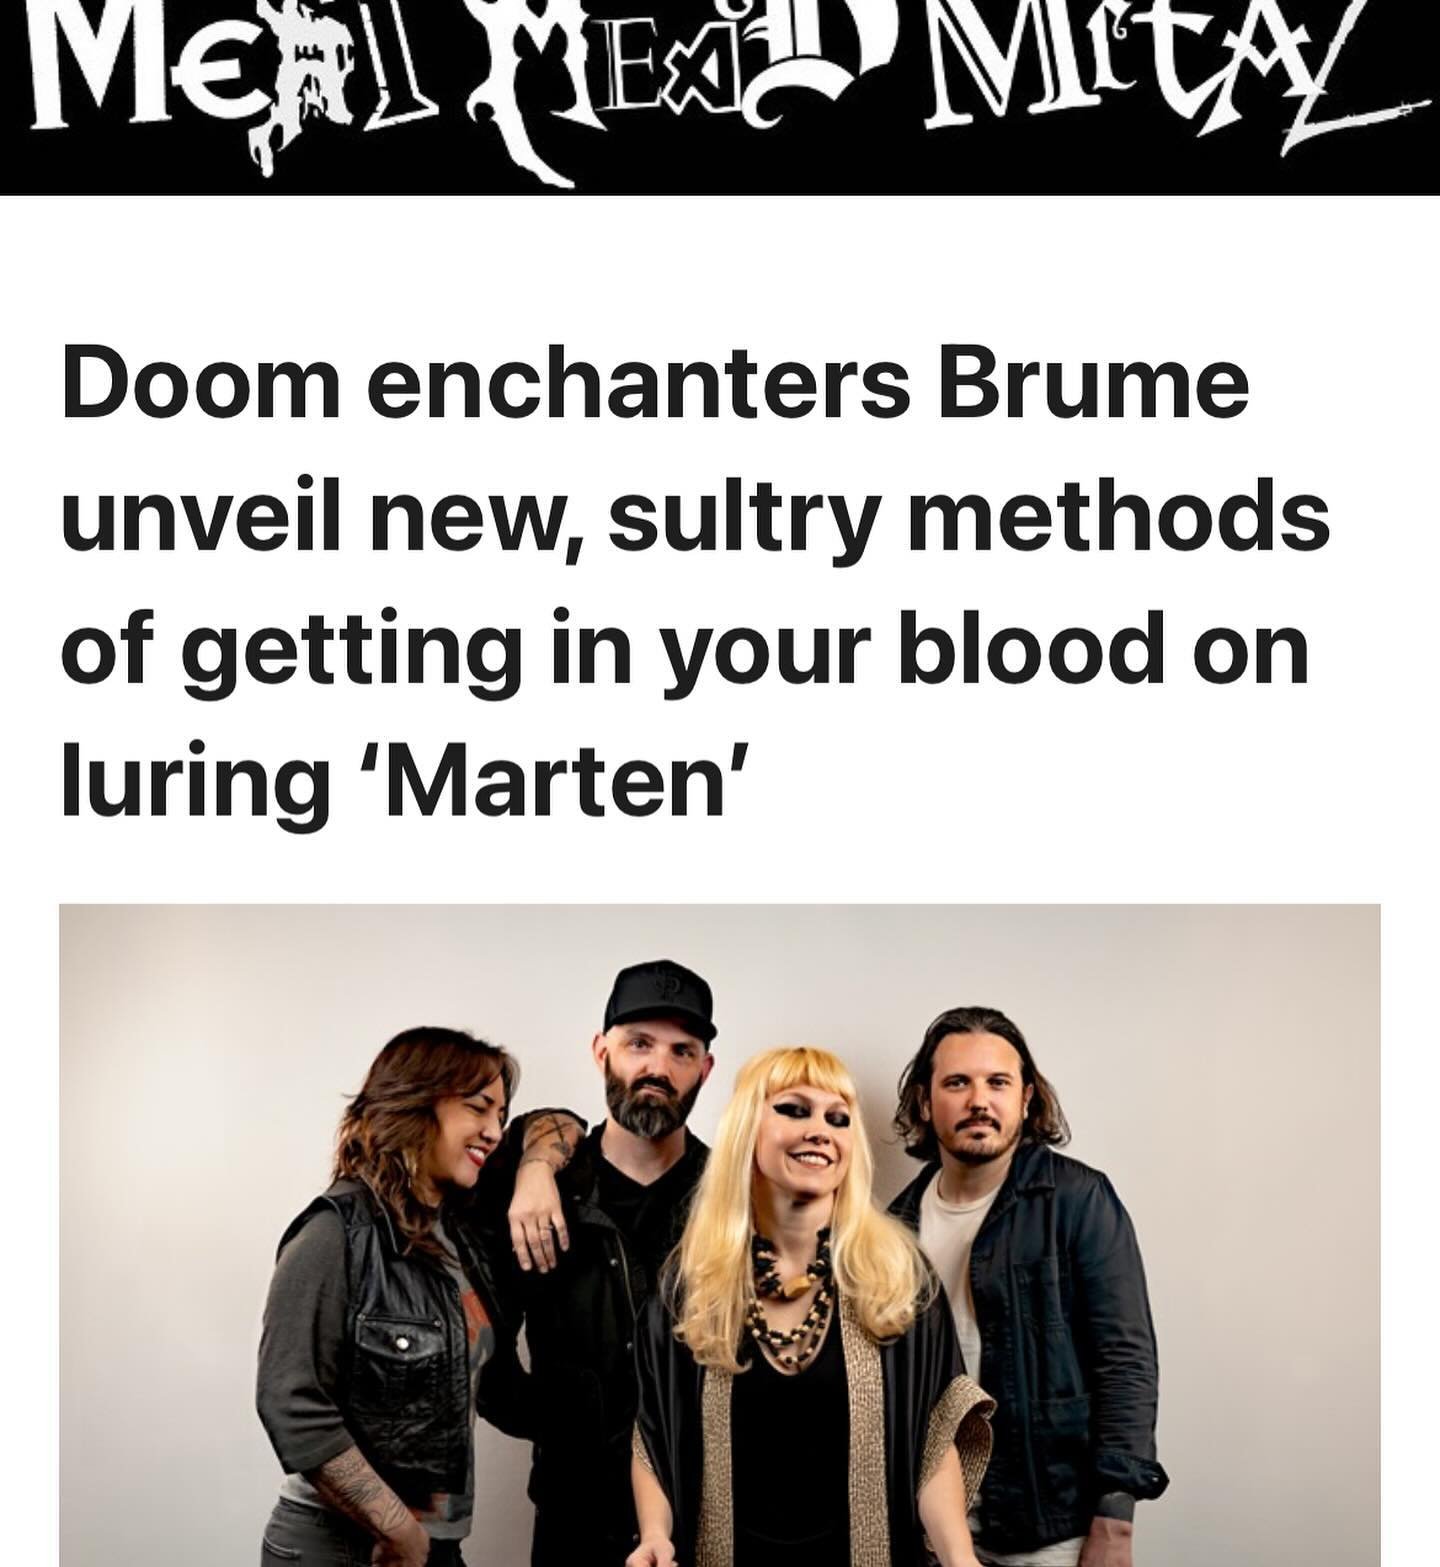 Thank you, @meat_mead_metal 
Read the rest of the review ☝🏼
Album out next month. Preorders in bio. 🧹